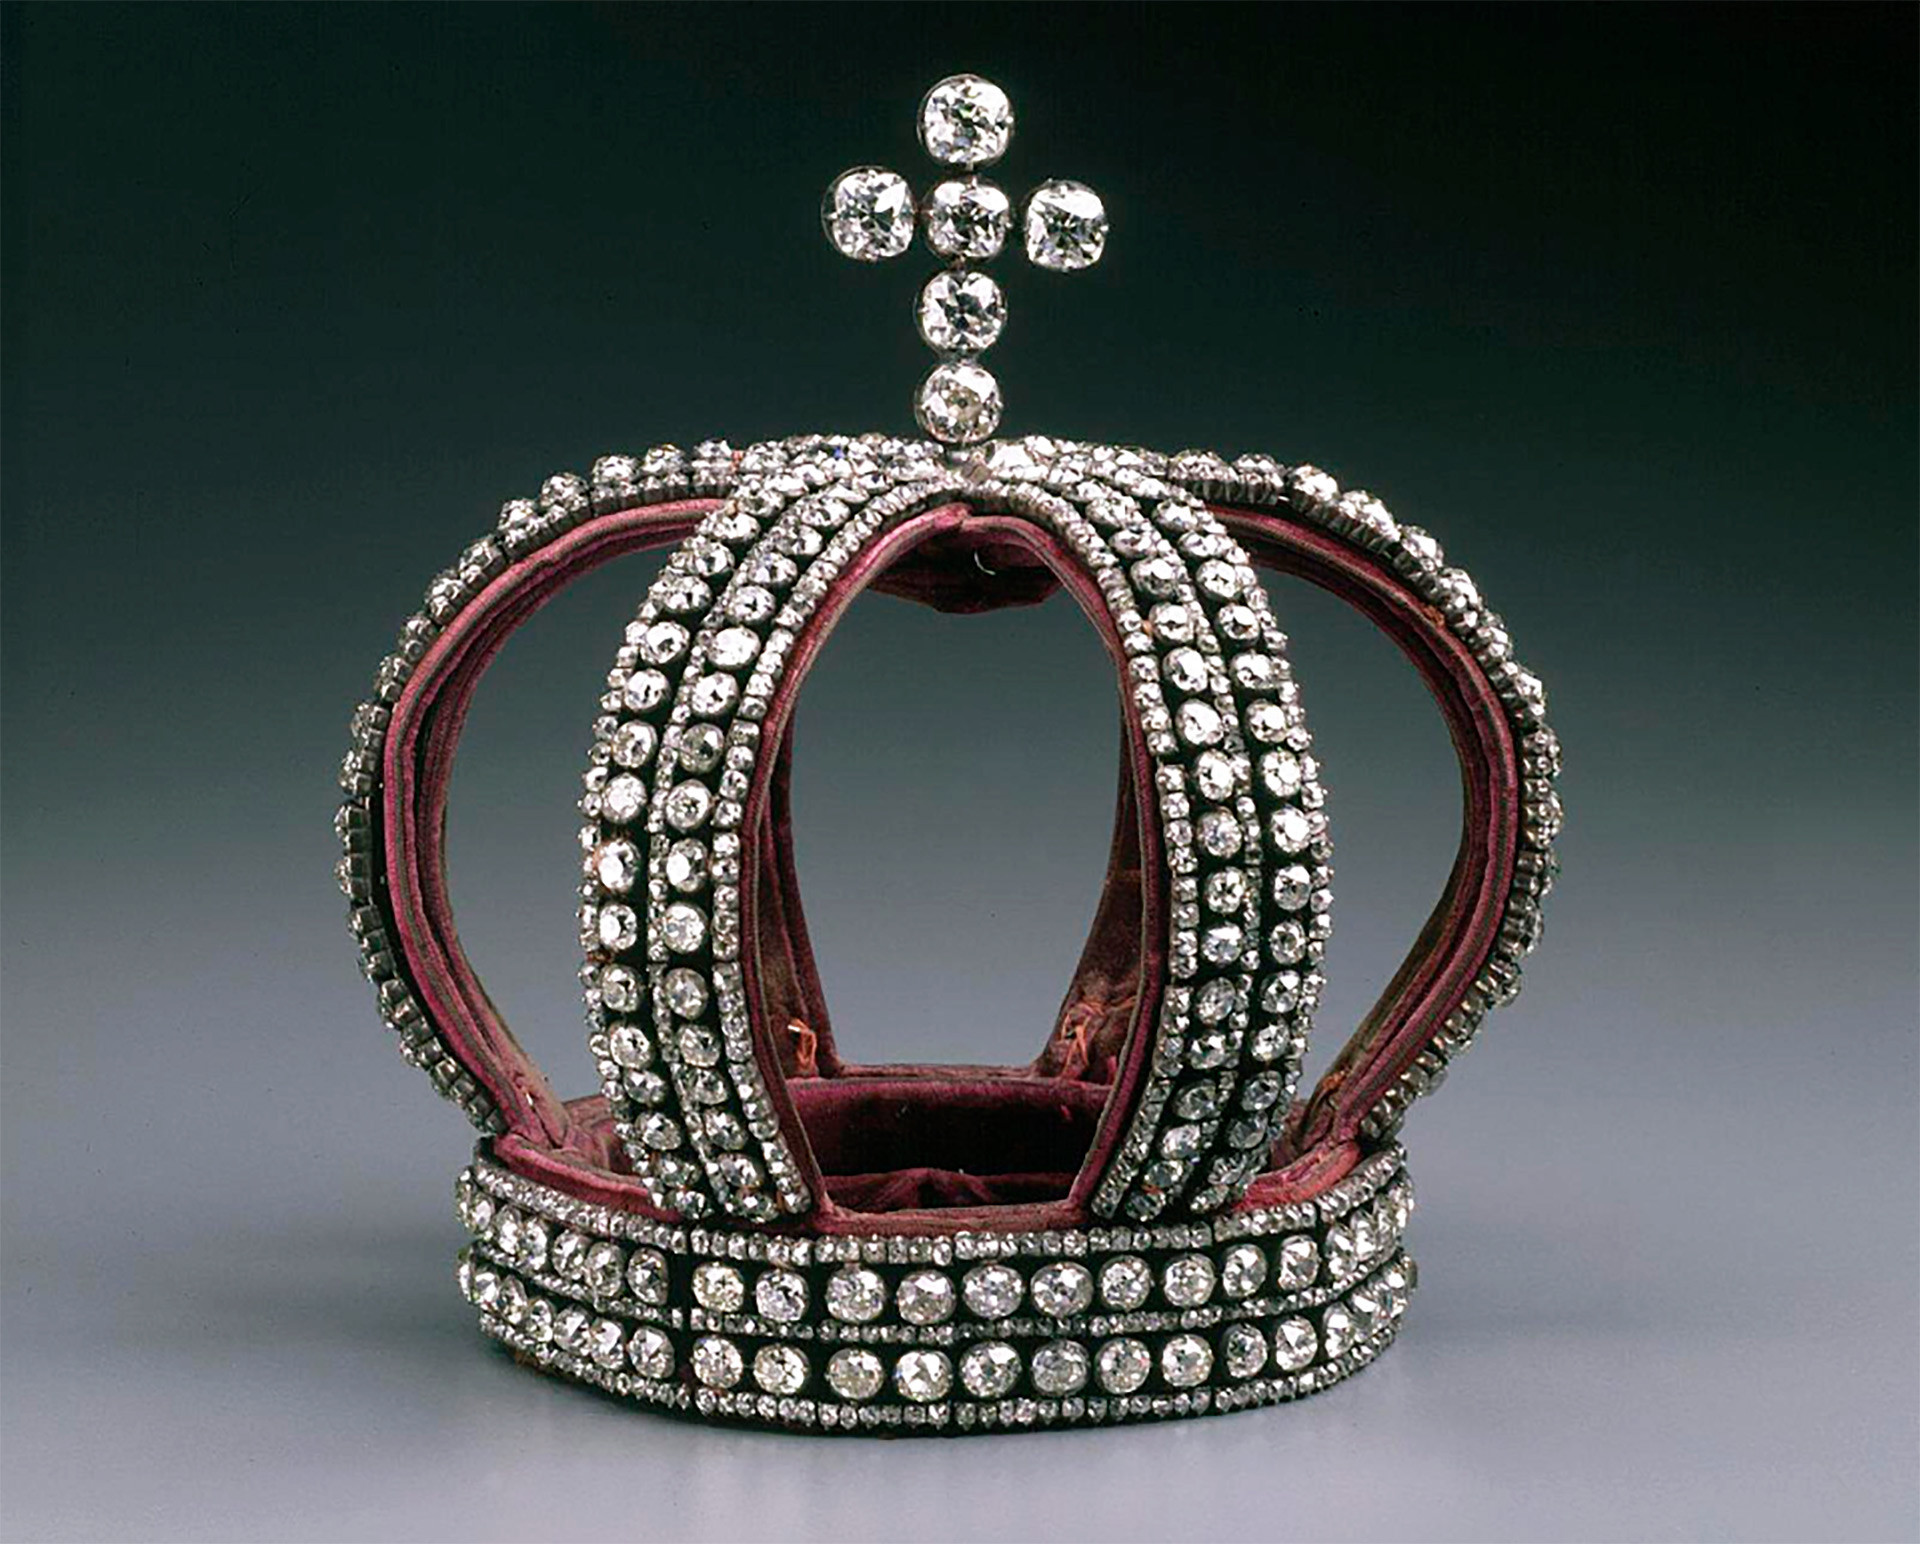 The wedding crown of Russia.